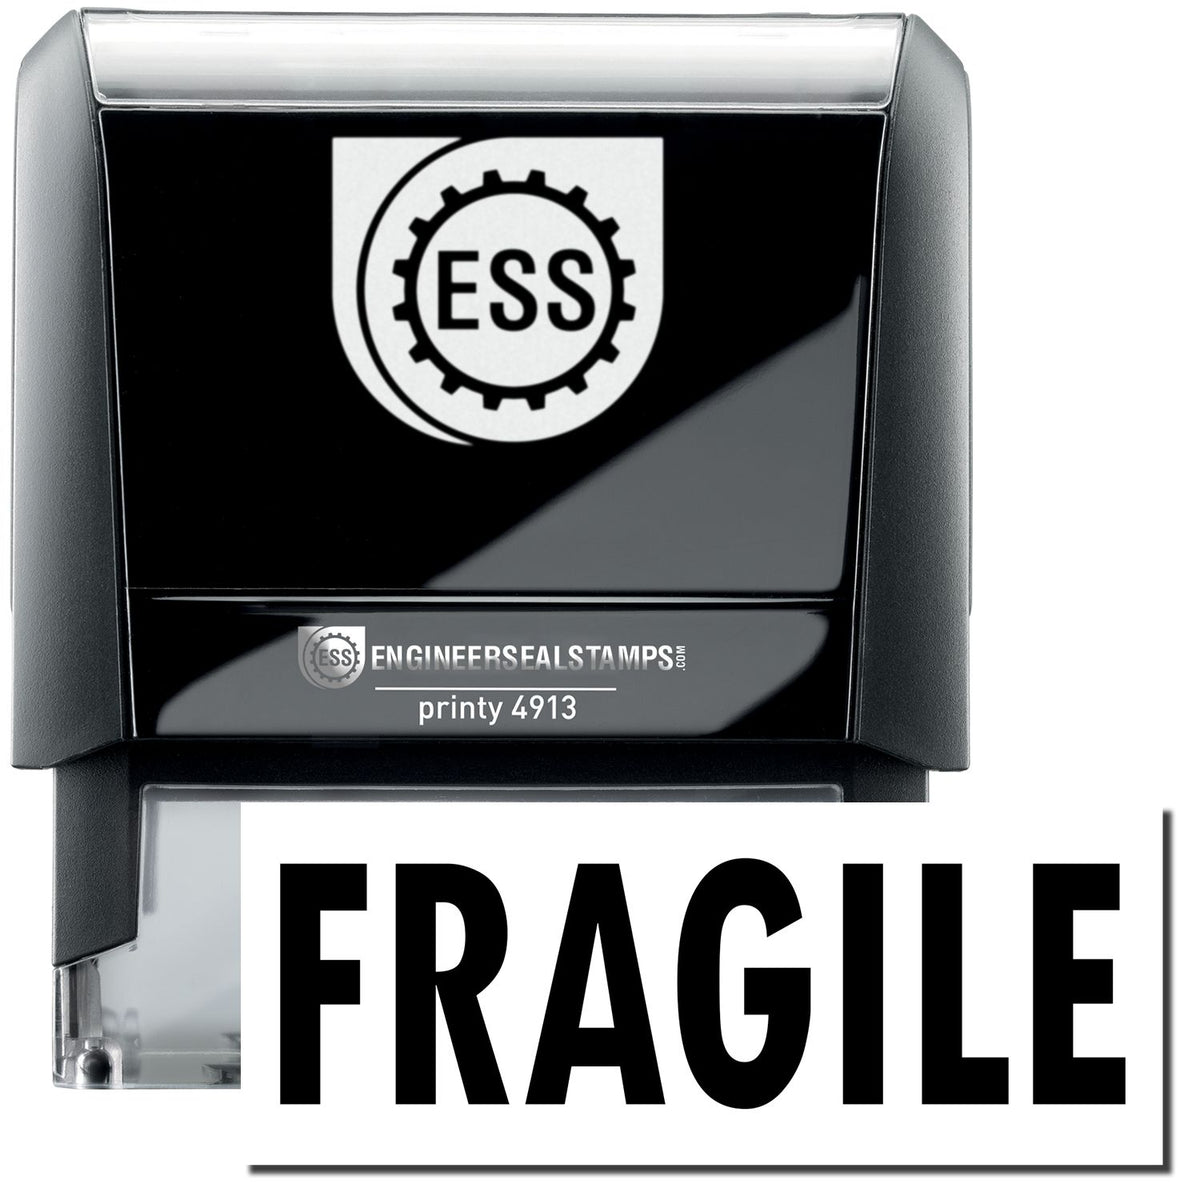 A self-inking stamp with a stamped image showing how the text &quot;FRAGILE&quot; in a large bold font is displayed by it.